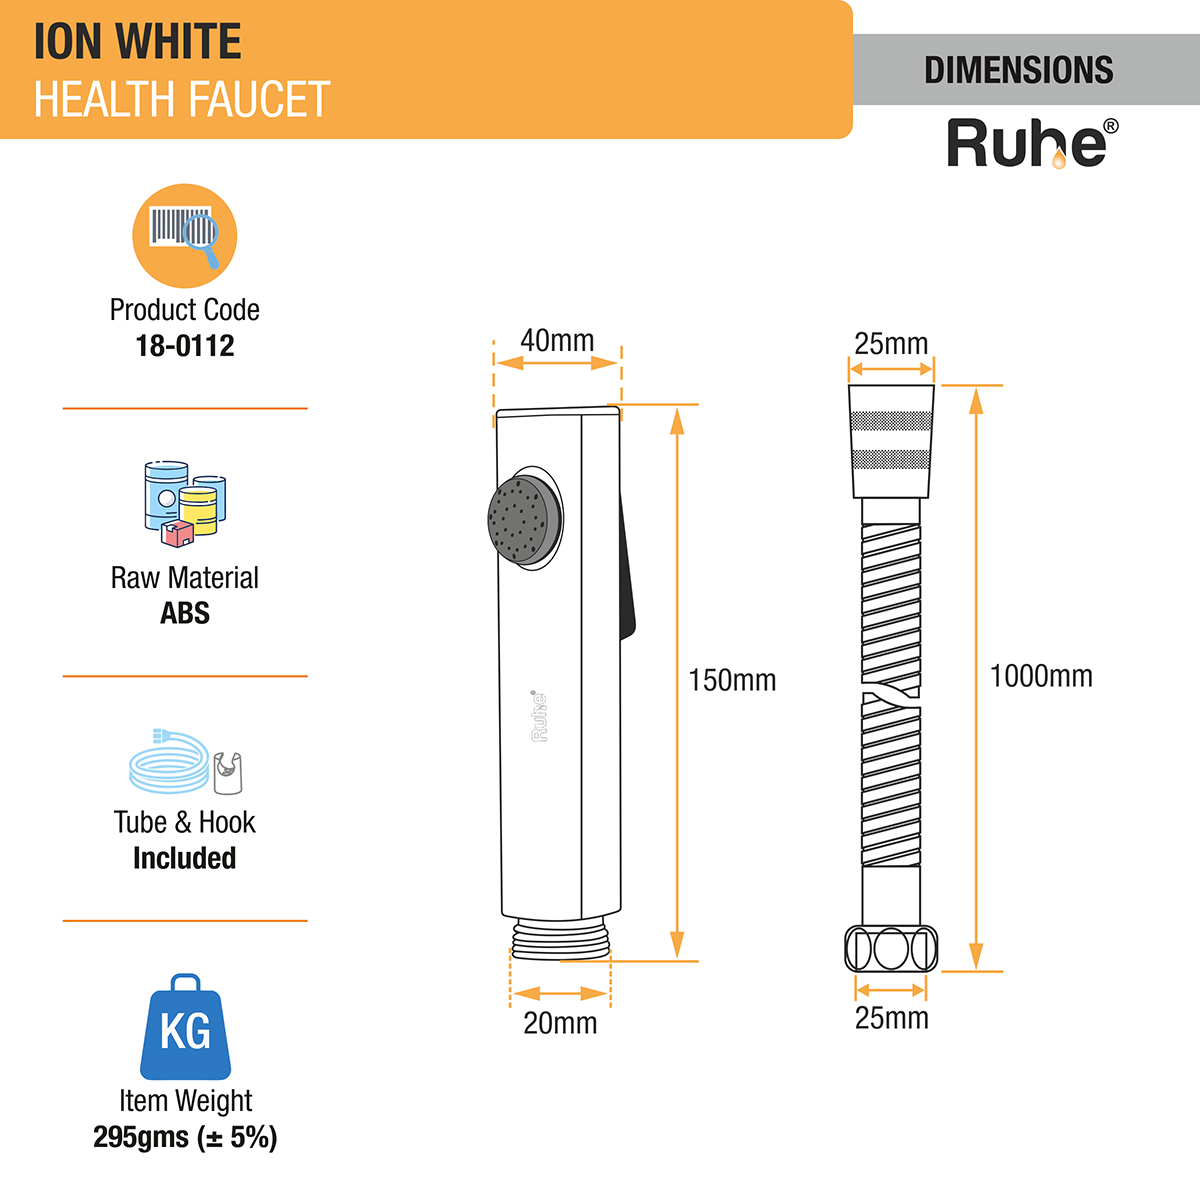 Ion White Health Faucet with Braided 1 Meter Flexible Hose (304 Grade) & Hook dimensions and sizes